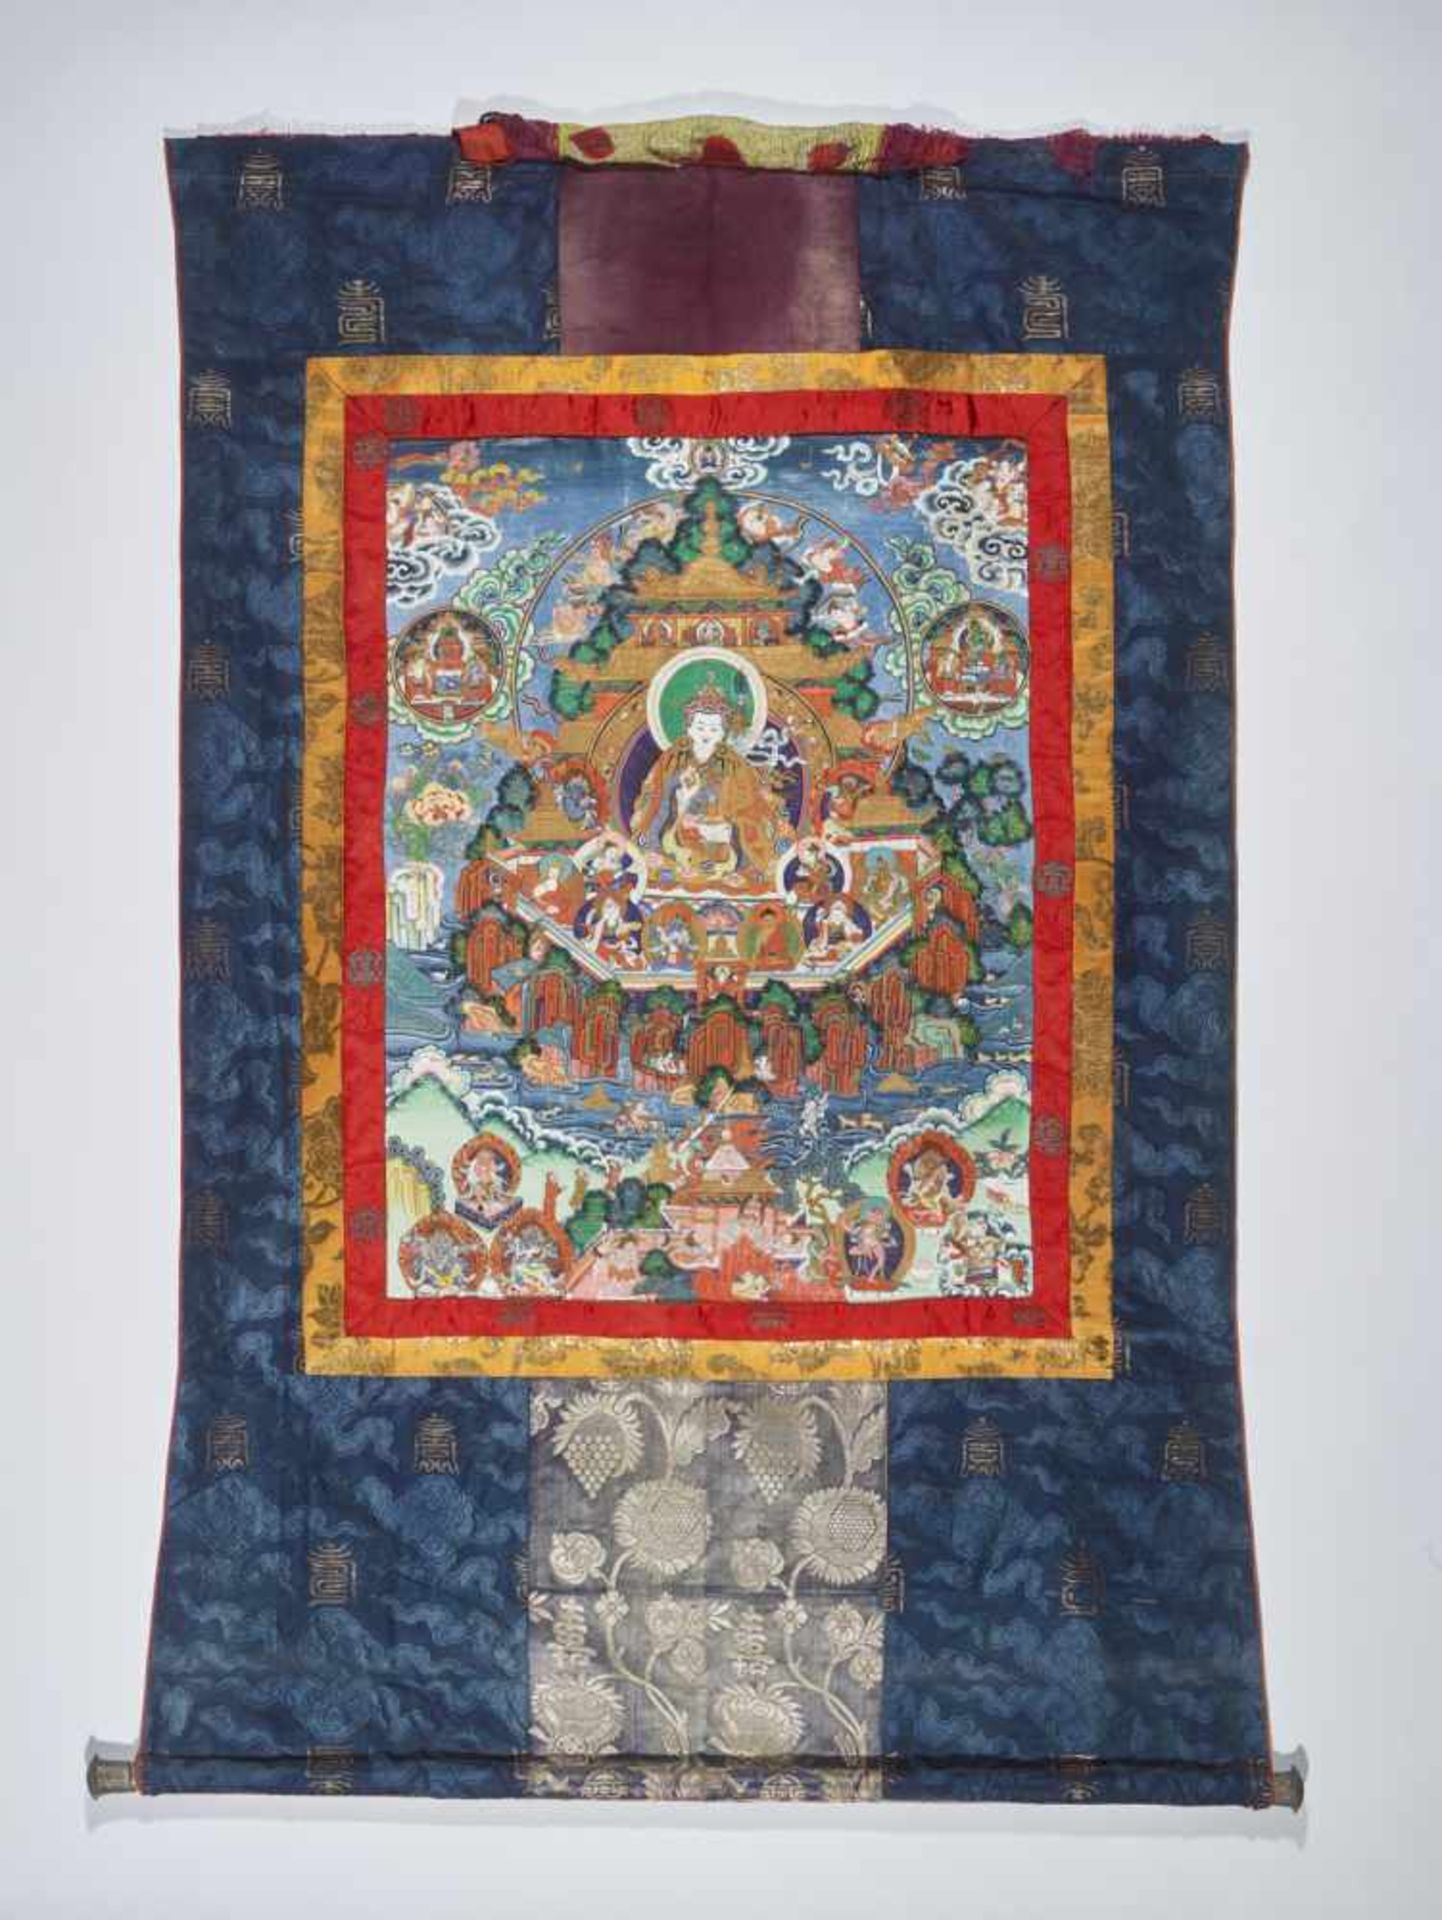 A MAGNIFICENT THANGKA OF GURU RINPOCHE IN ZANGDOK PALRI Distemper and gold paint on cloth, framed by - Image 5 of 7